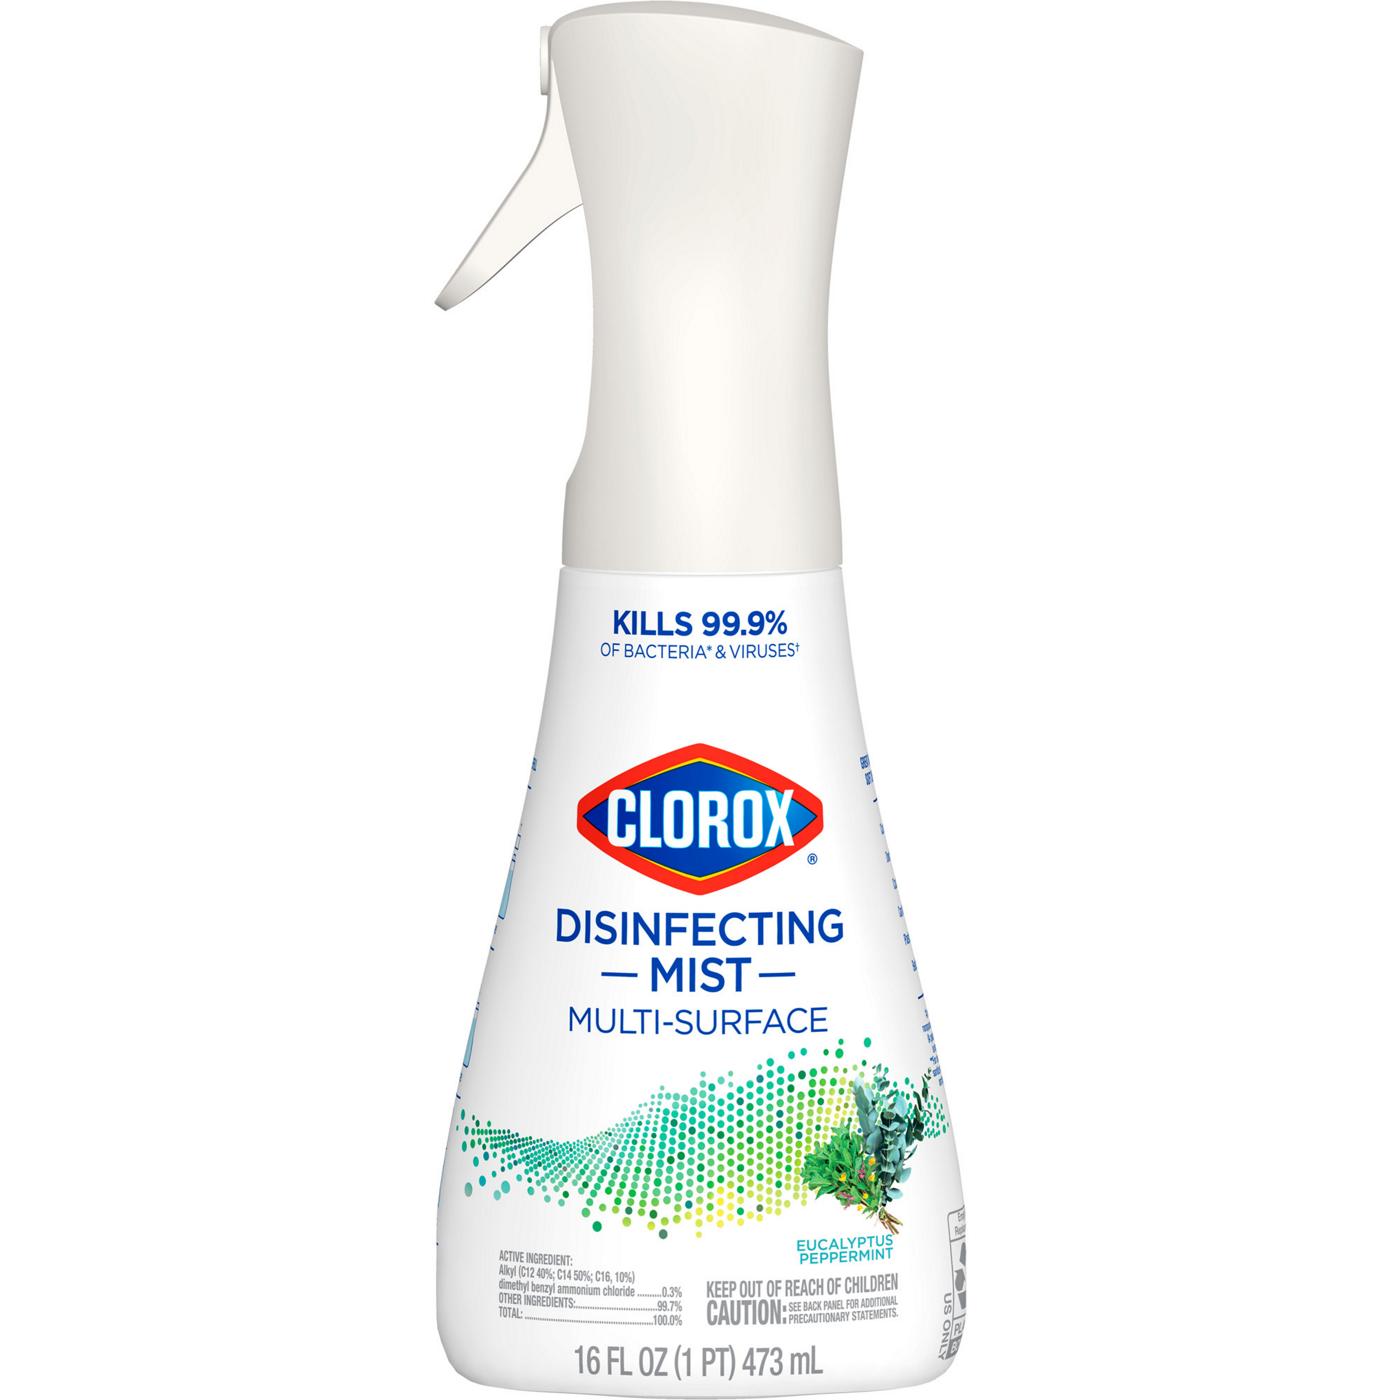 Clorox Eucalyptus Peppermint Multi-Surface Disinfecting Mist; image 1 of 19